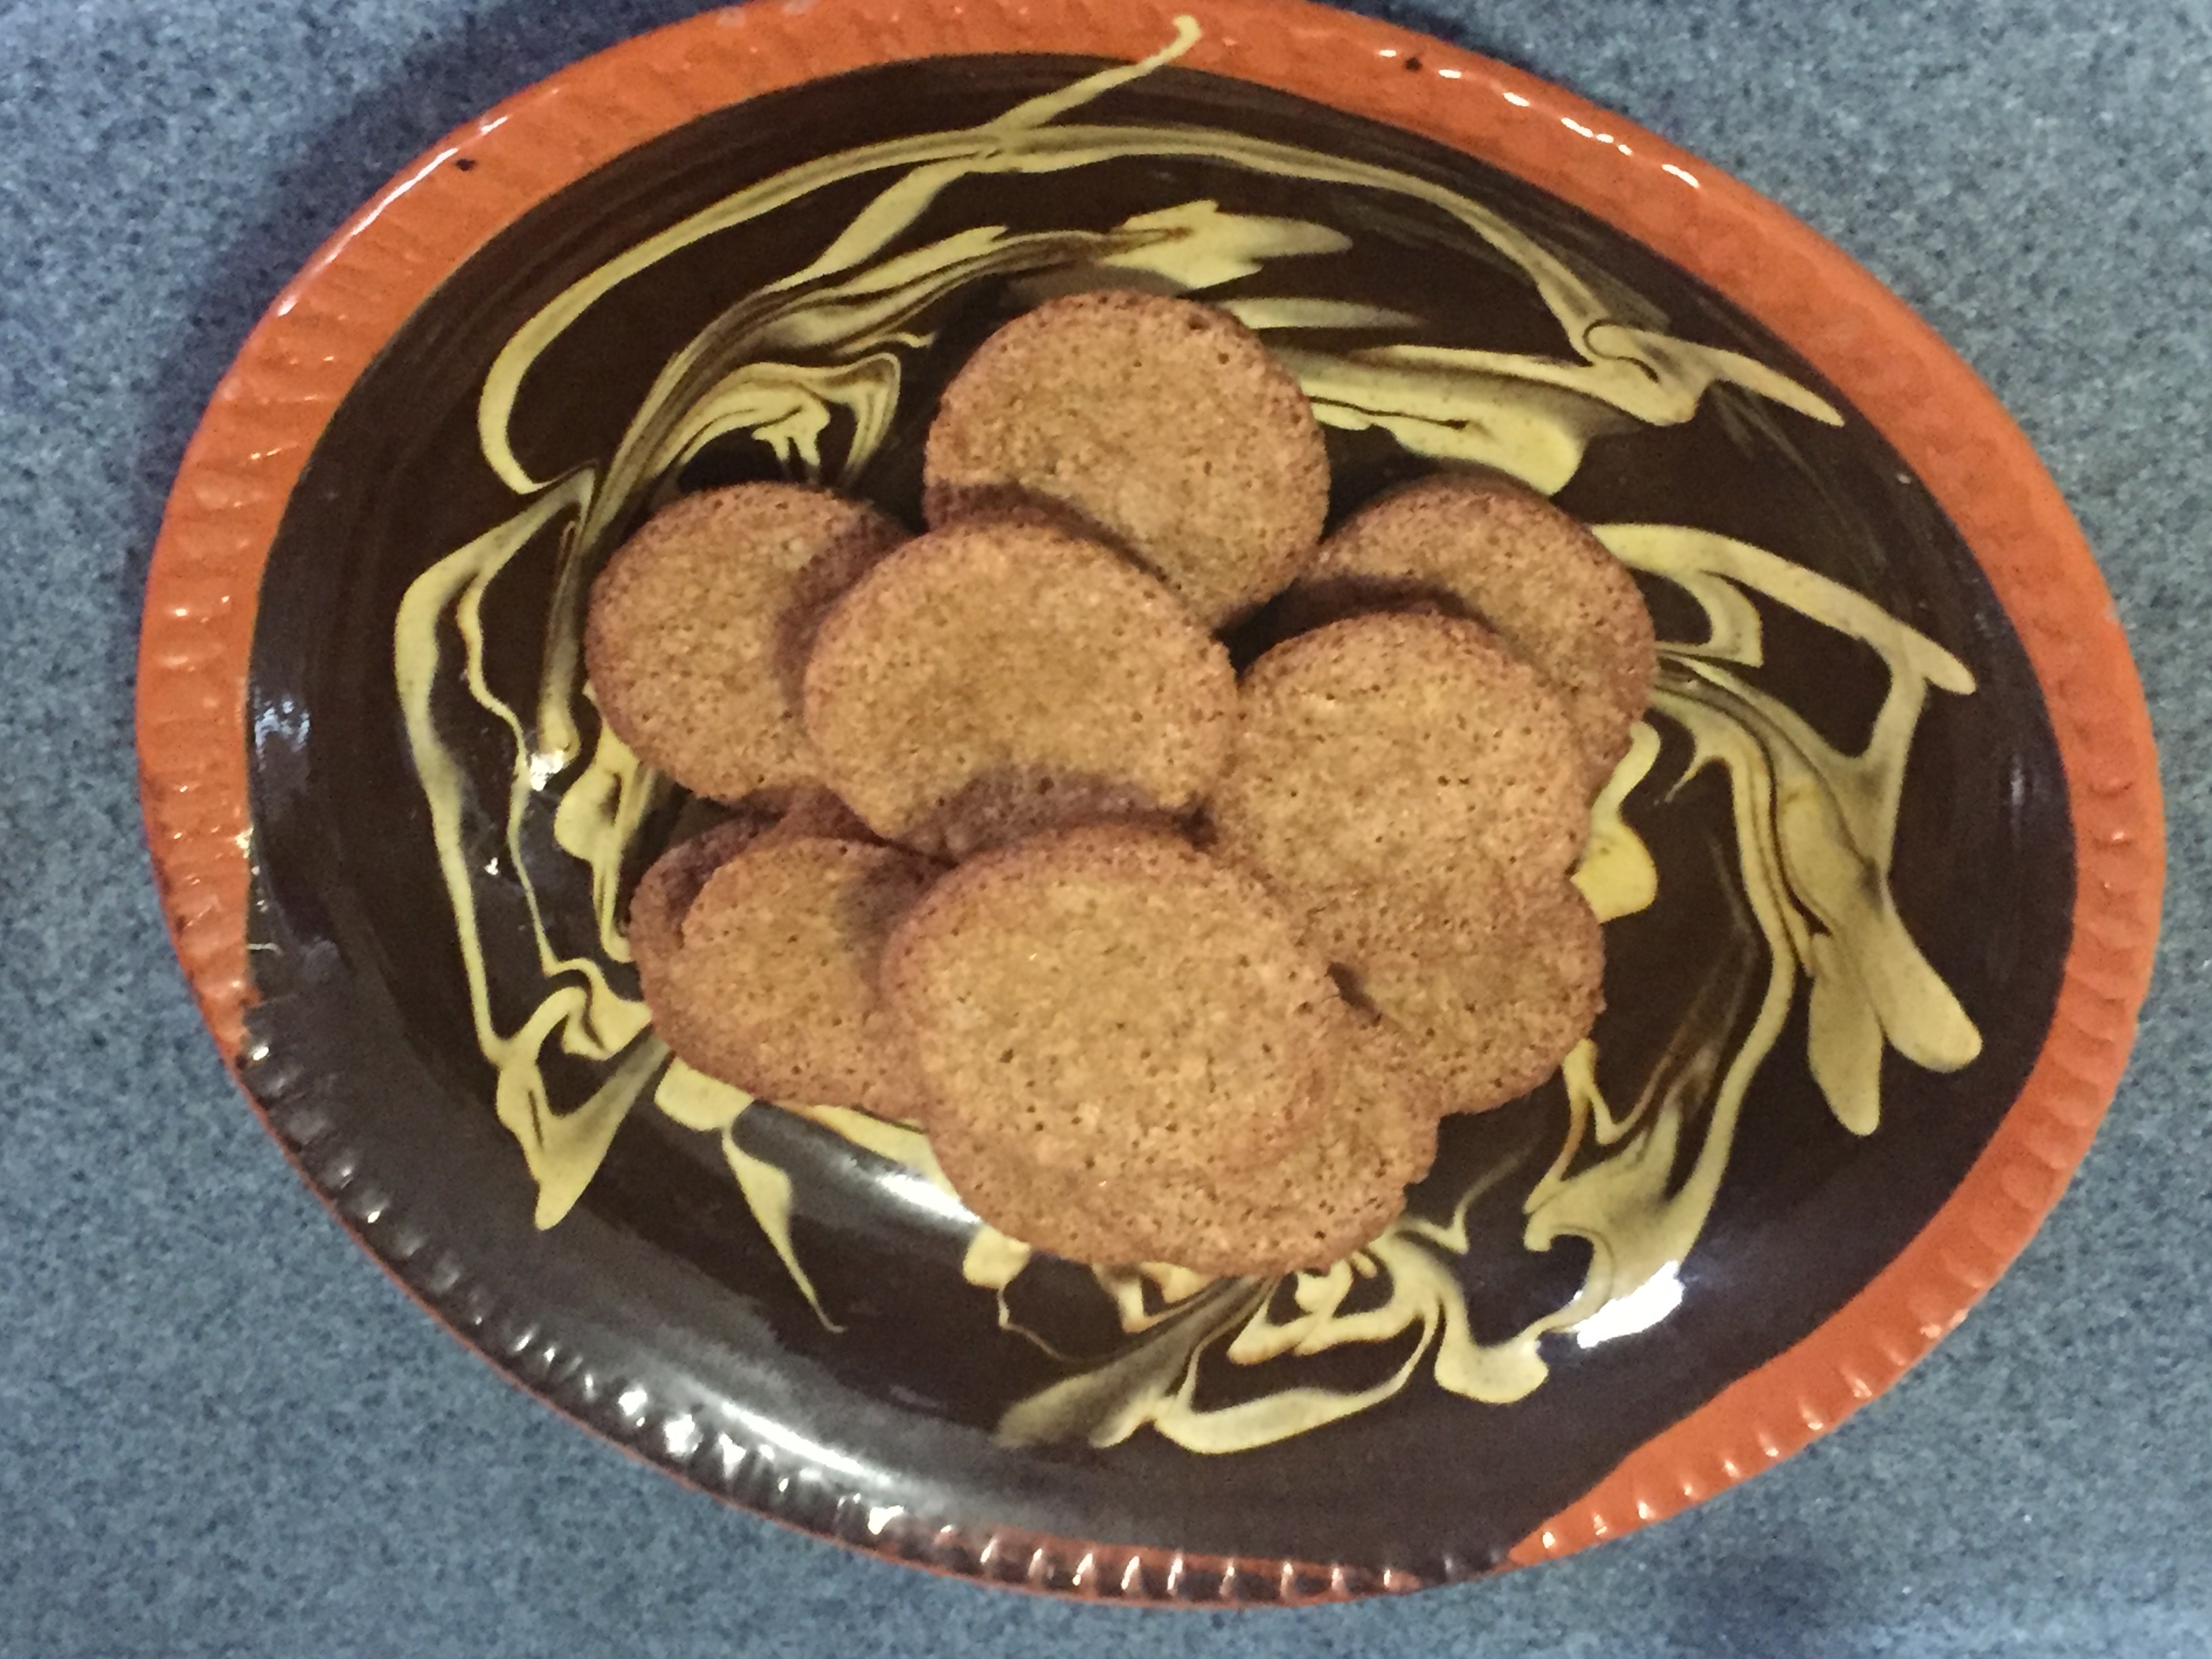 Eleven baked small nut cakes are stacked on a black and orange plate with yellow decorative swirling.